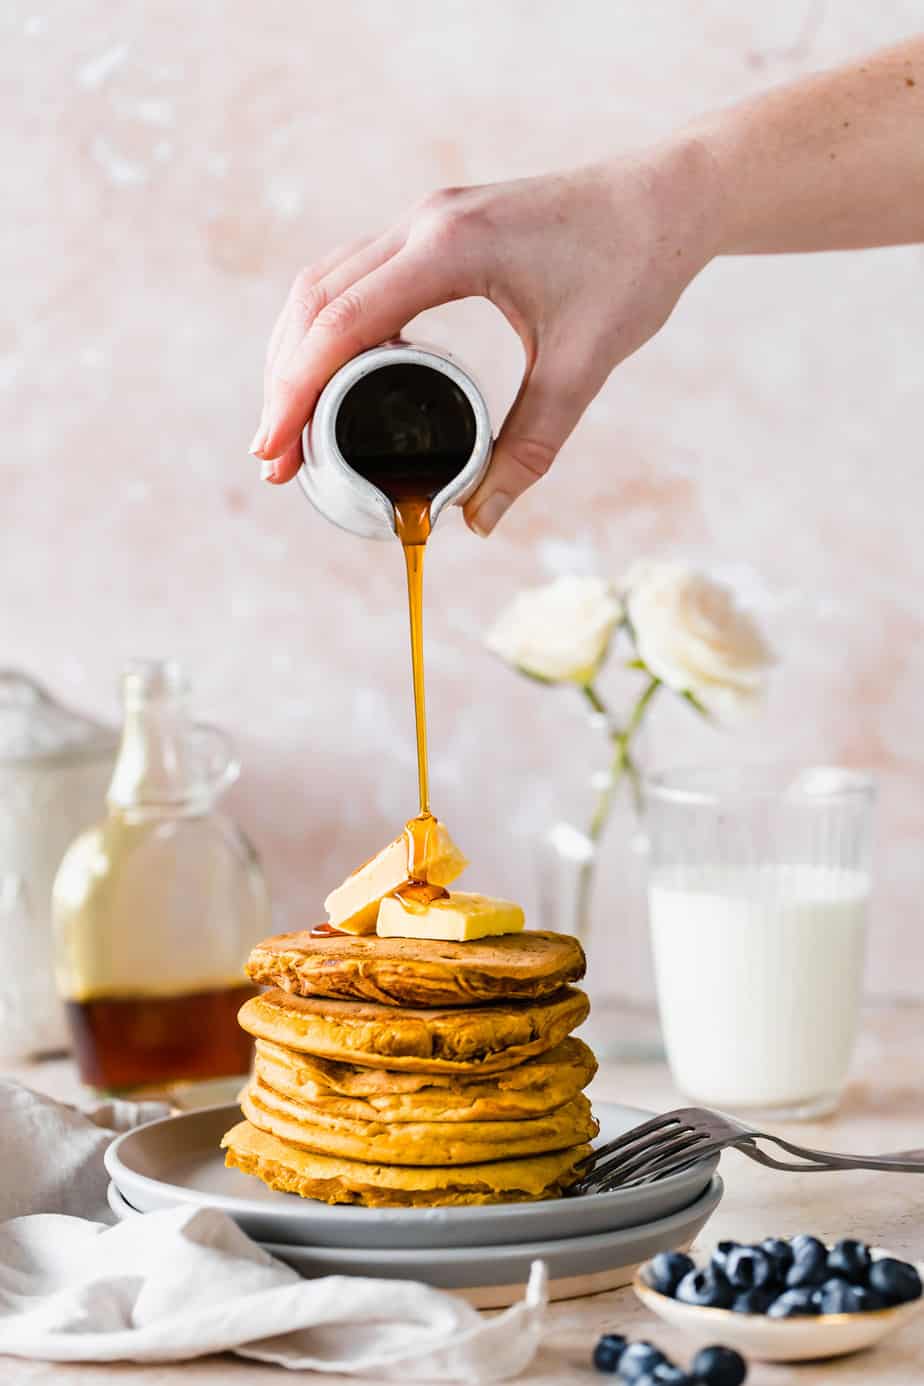 Fluffy Pumpkin Pancakes or Hotcakes with maple syrup